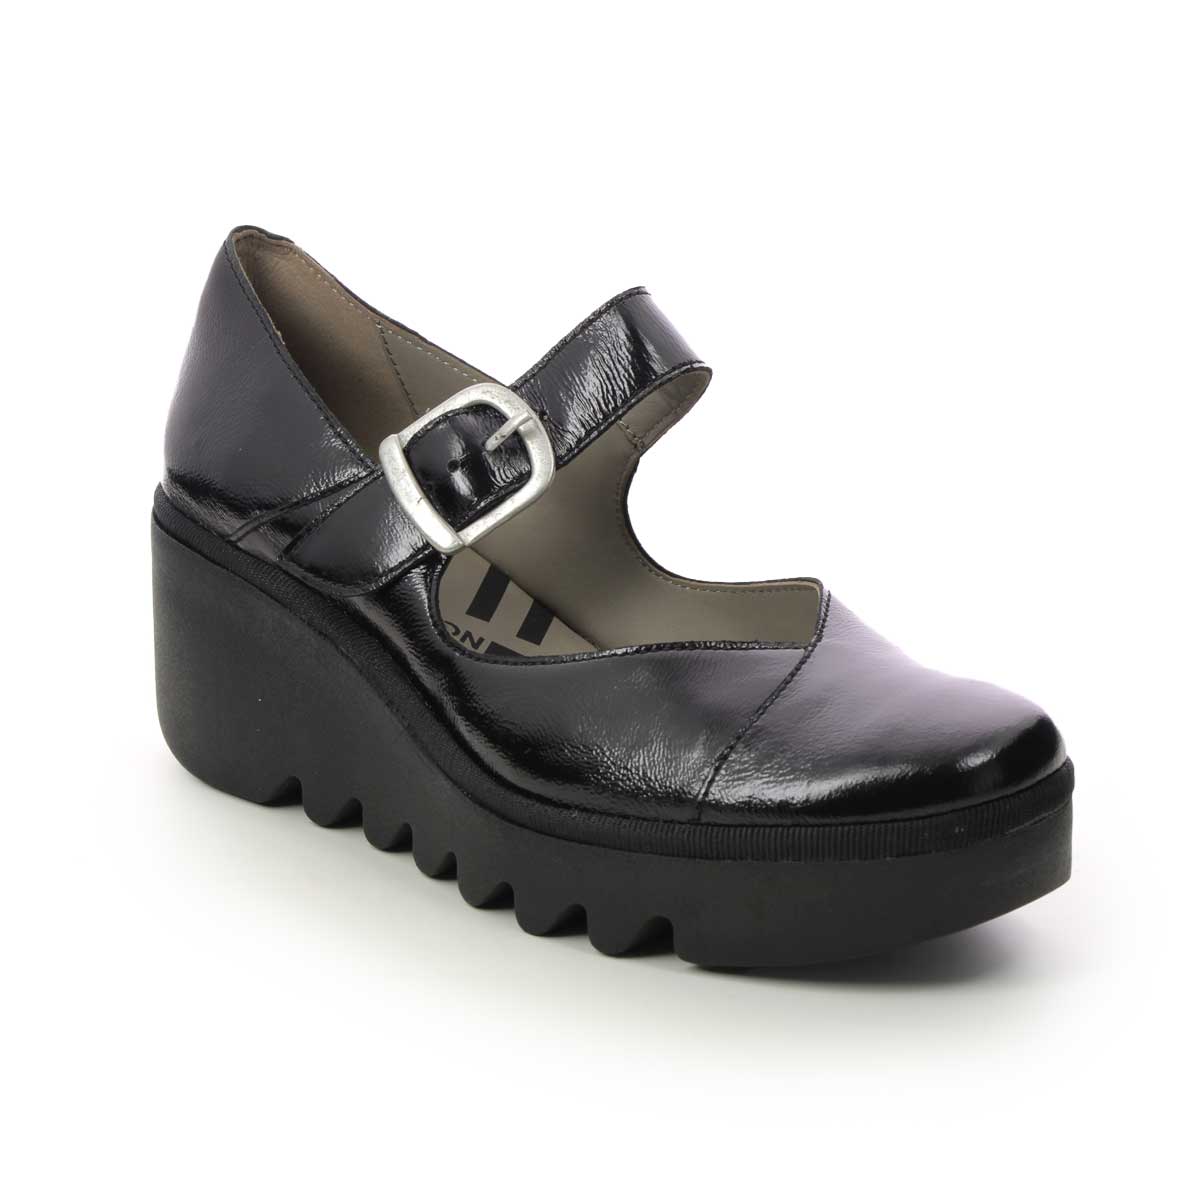 Fly London Baxe   Blu Lmj Black Patent Womens Wedge Shoes P501428 In Size 40 In Plain Black Patent